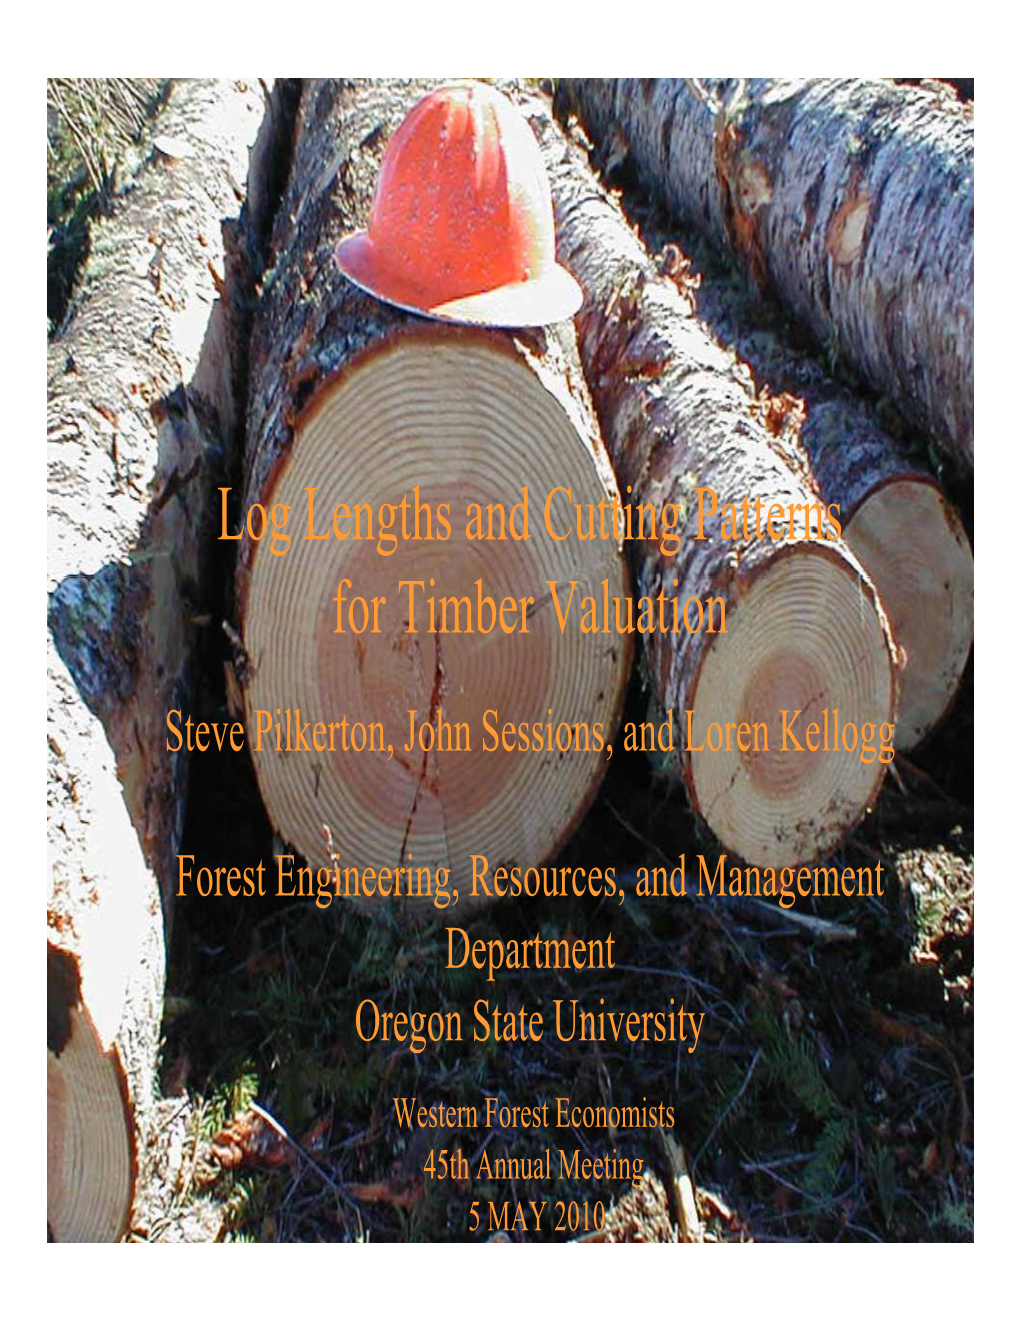 Log Lengths and Cutting Patterns for Timber Valuation Steve Pilkerton , John Sessions, and Loren Kellogg